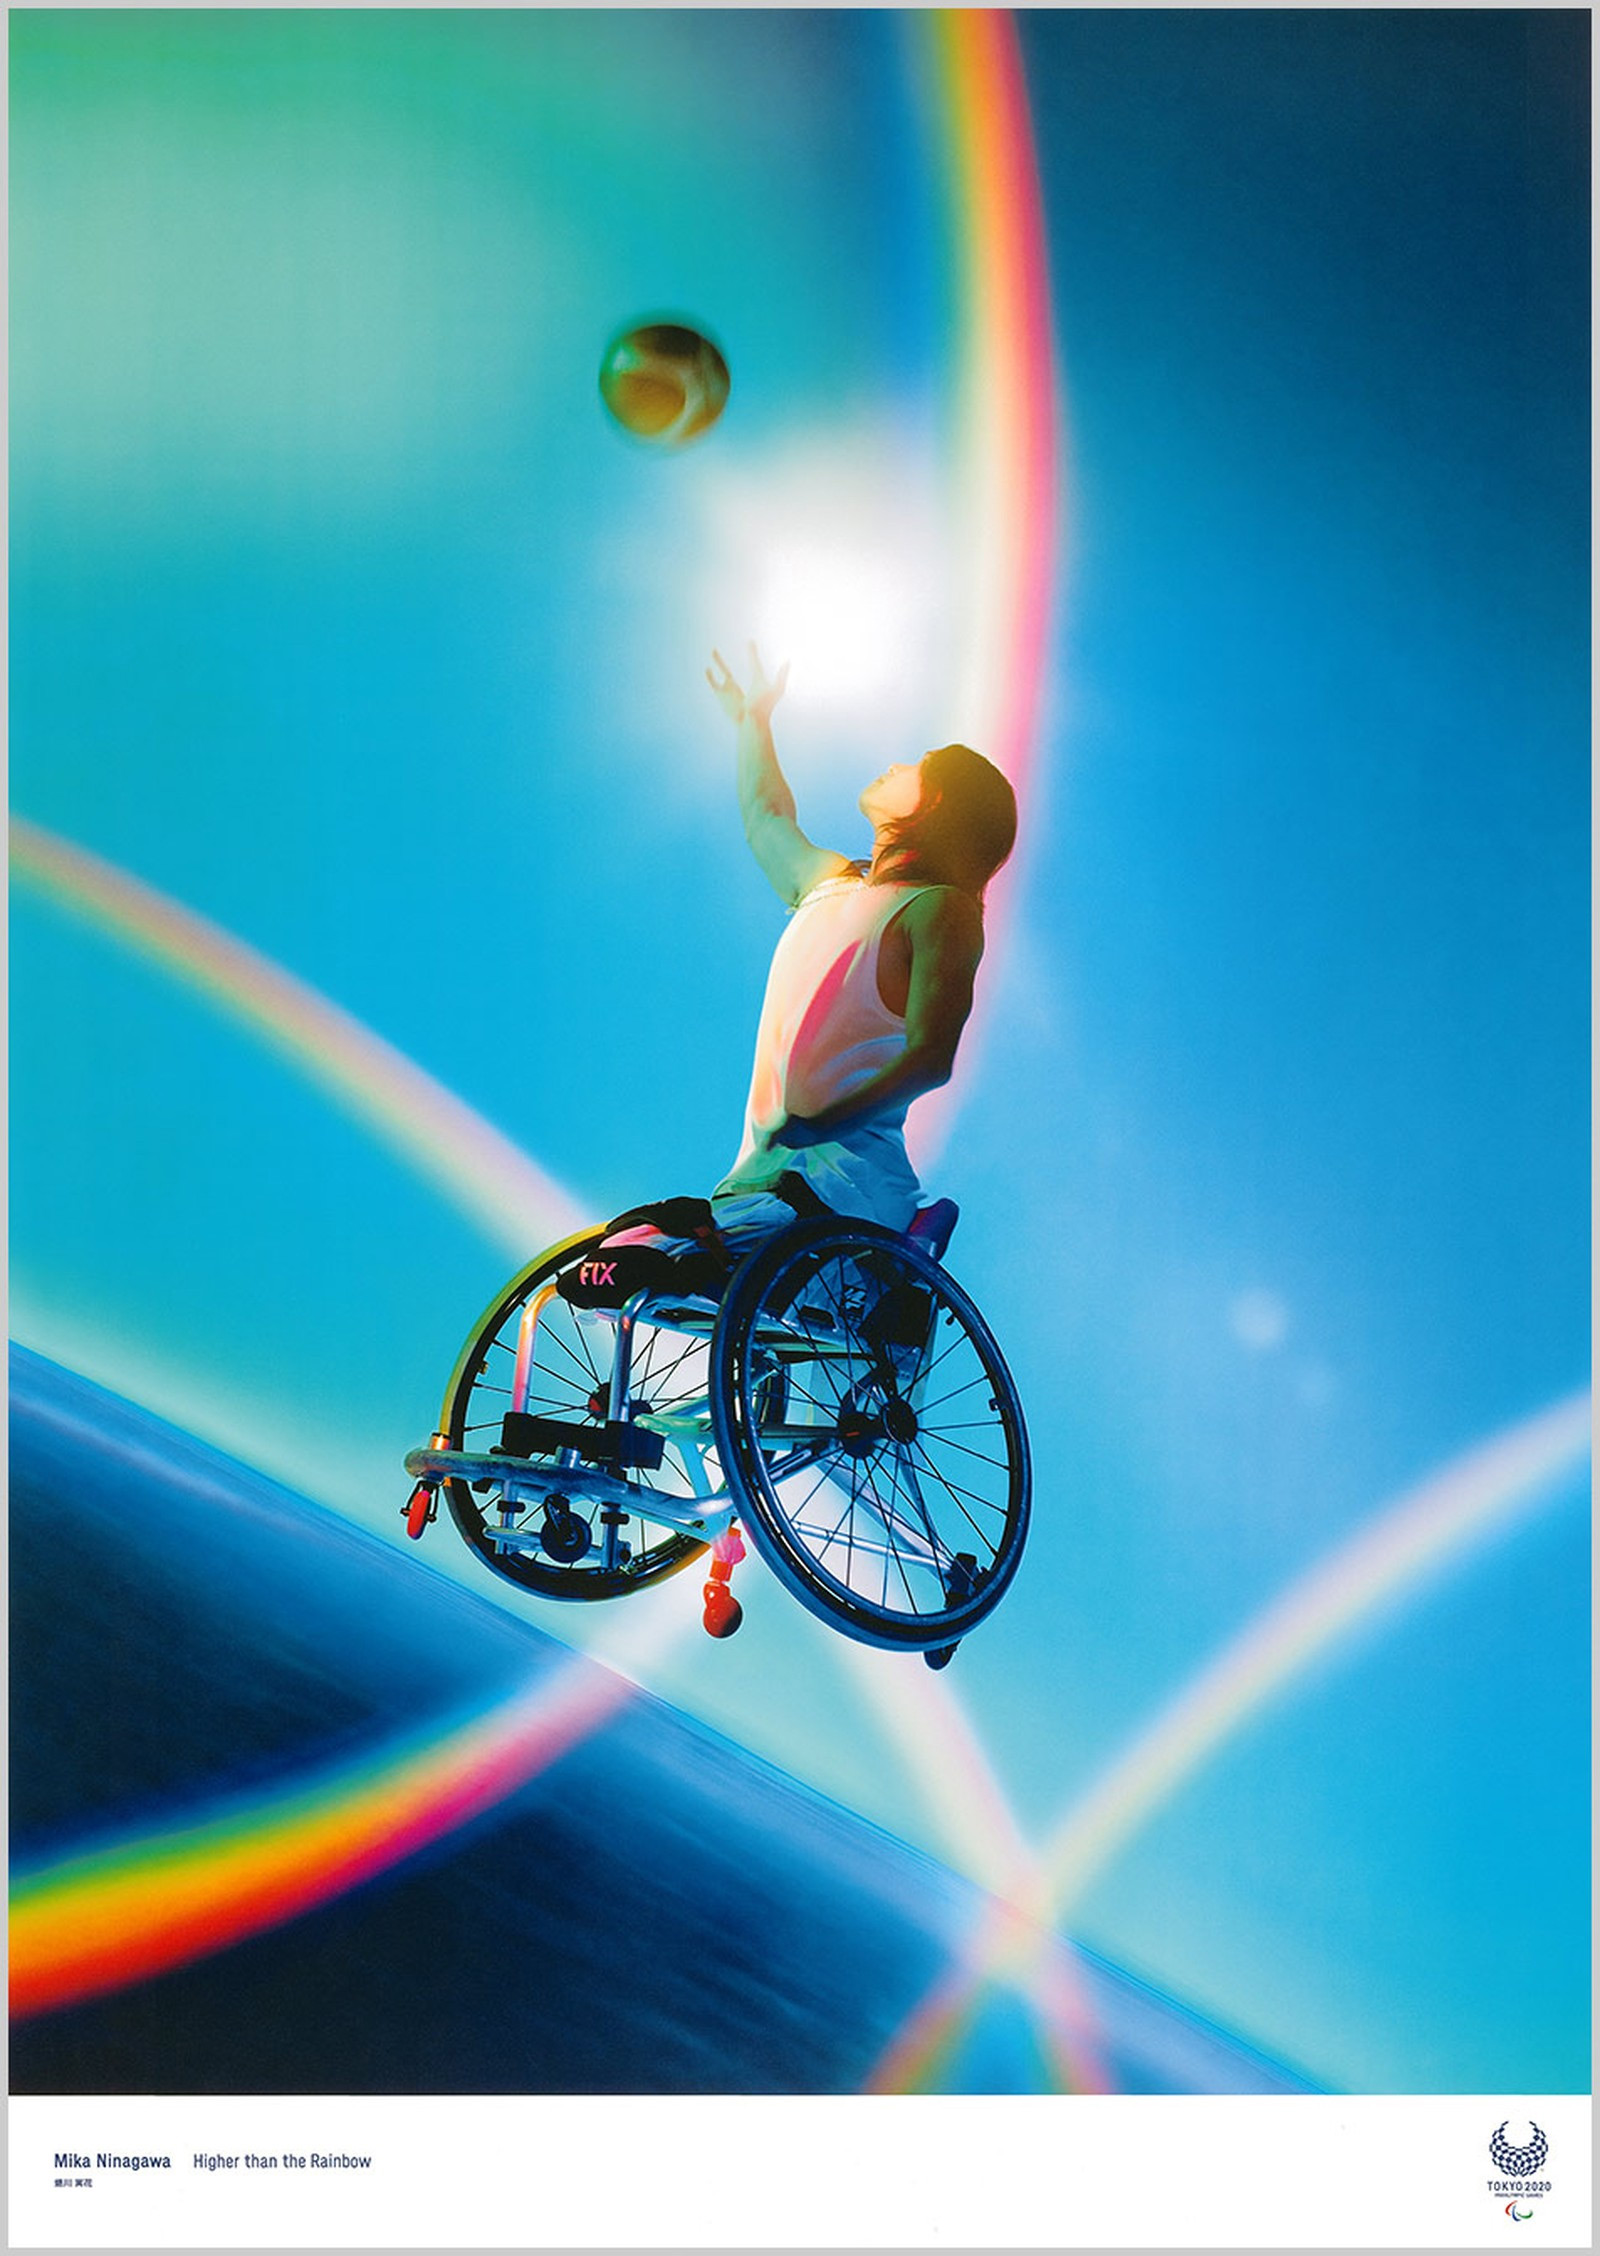 The Tokyo 2020 Olympic and Paralympic Posters Feature a Wildly Diverse Blend of Artistic Styles